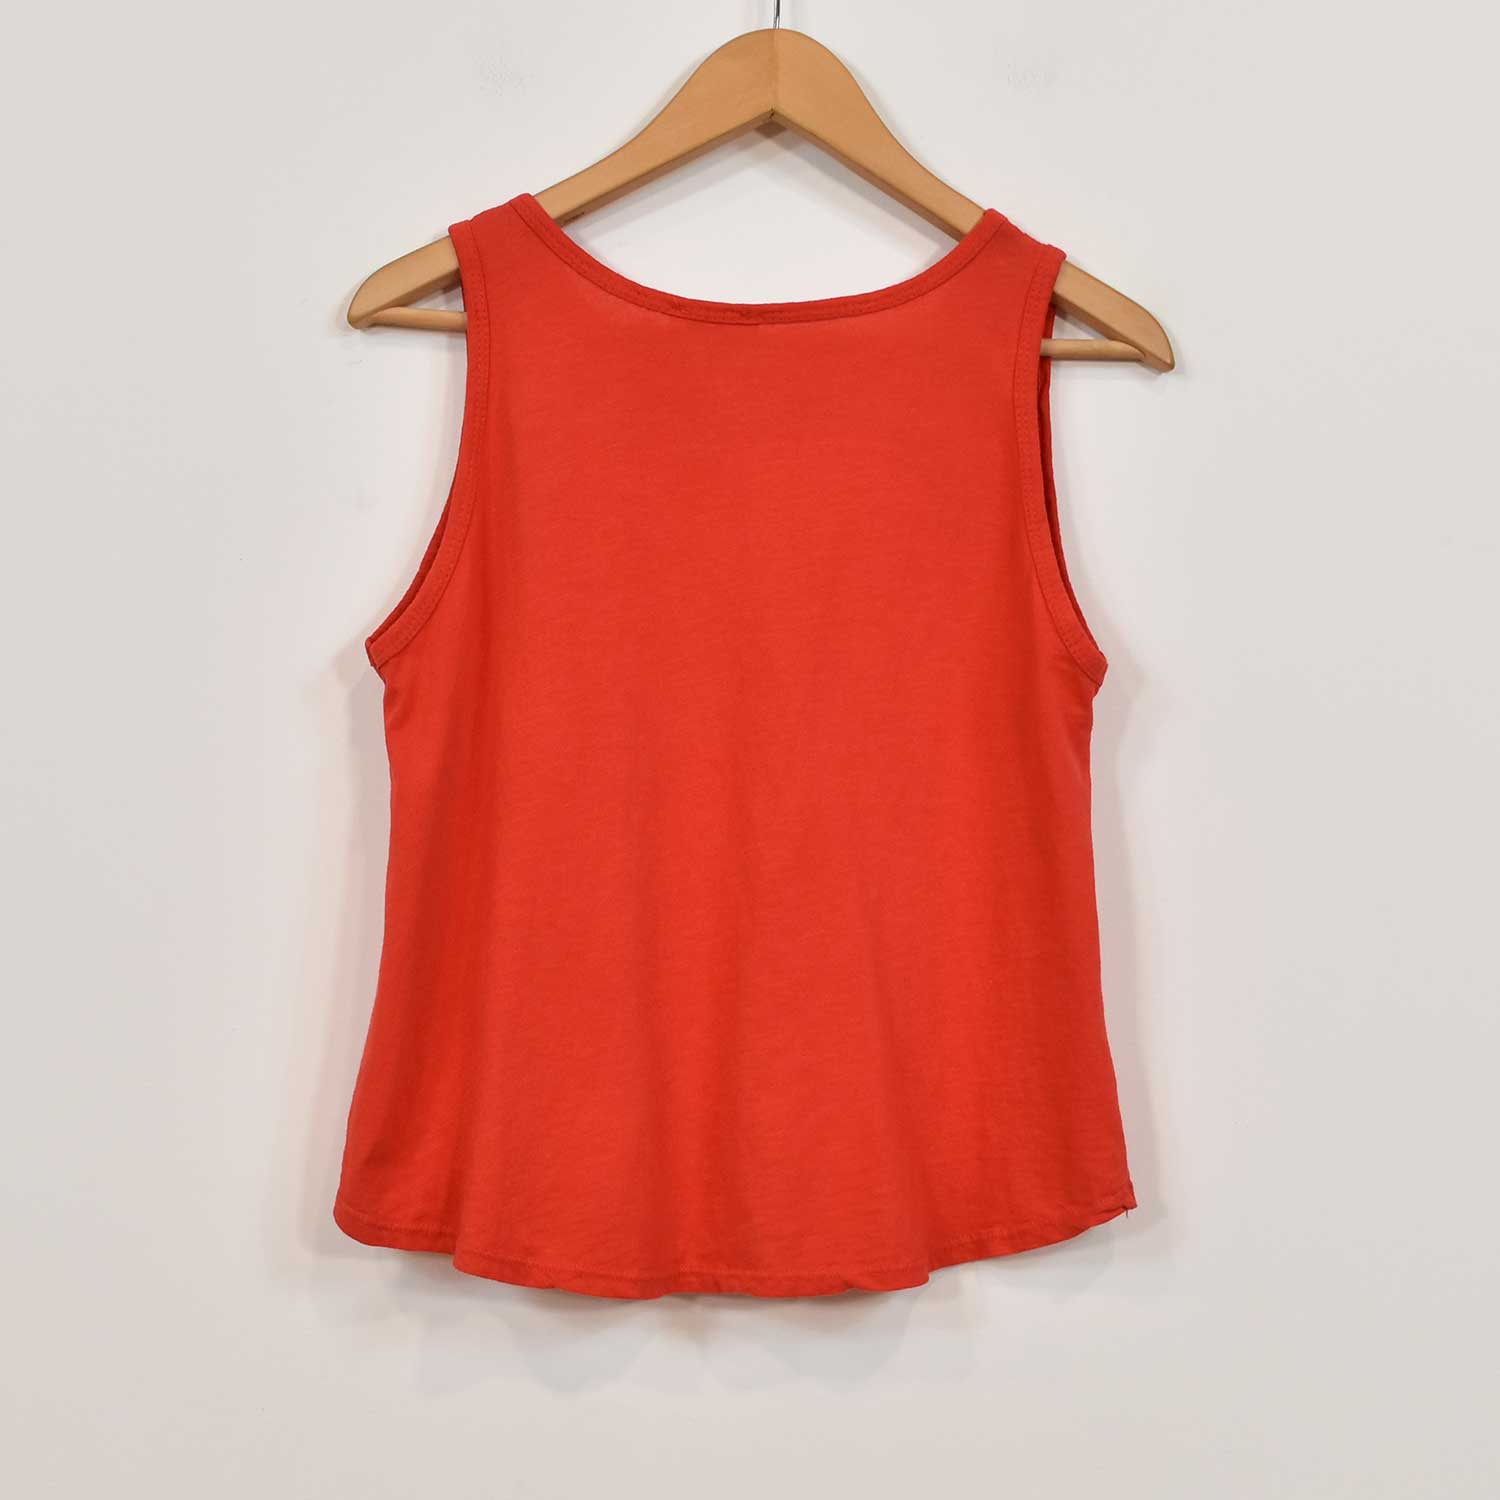 Red flared tank top